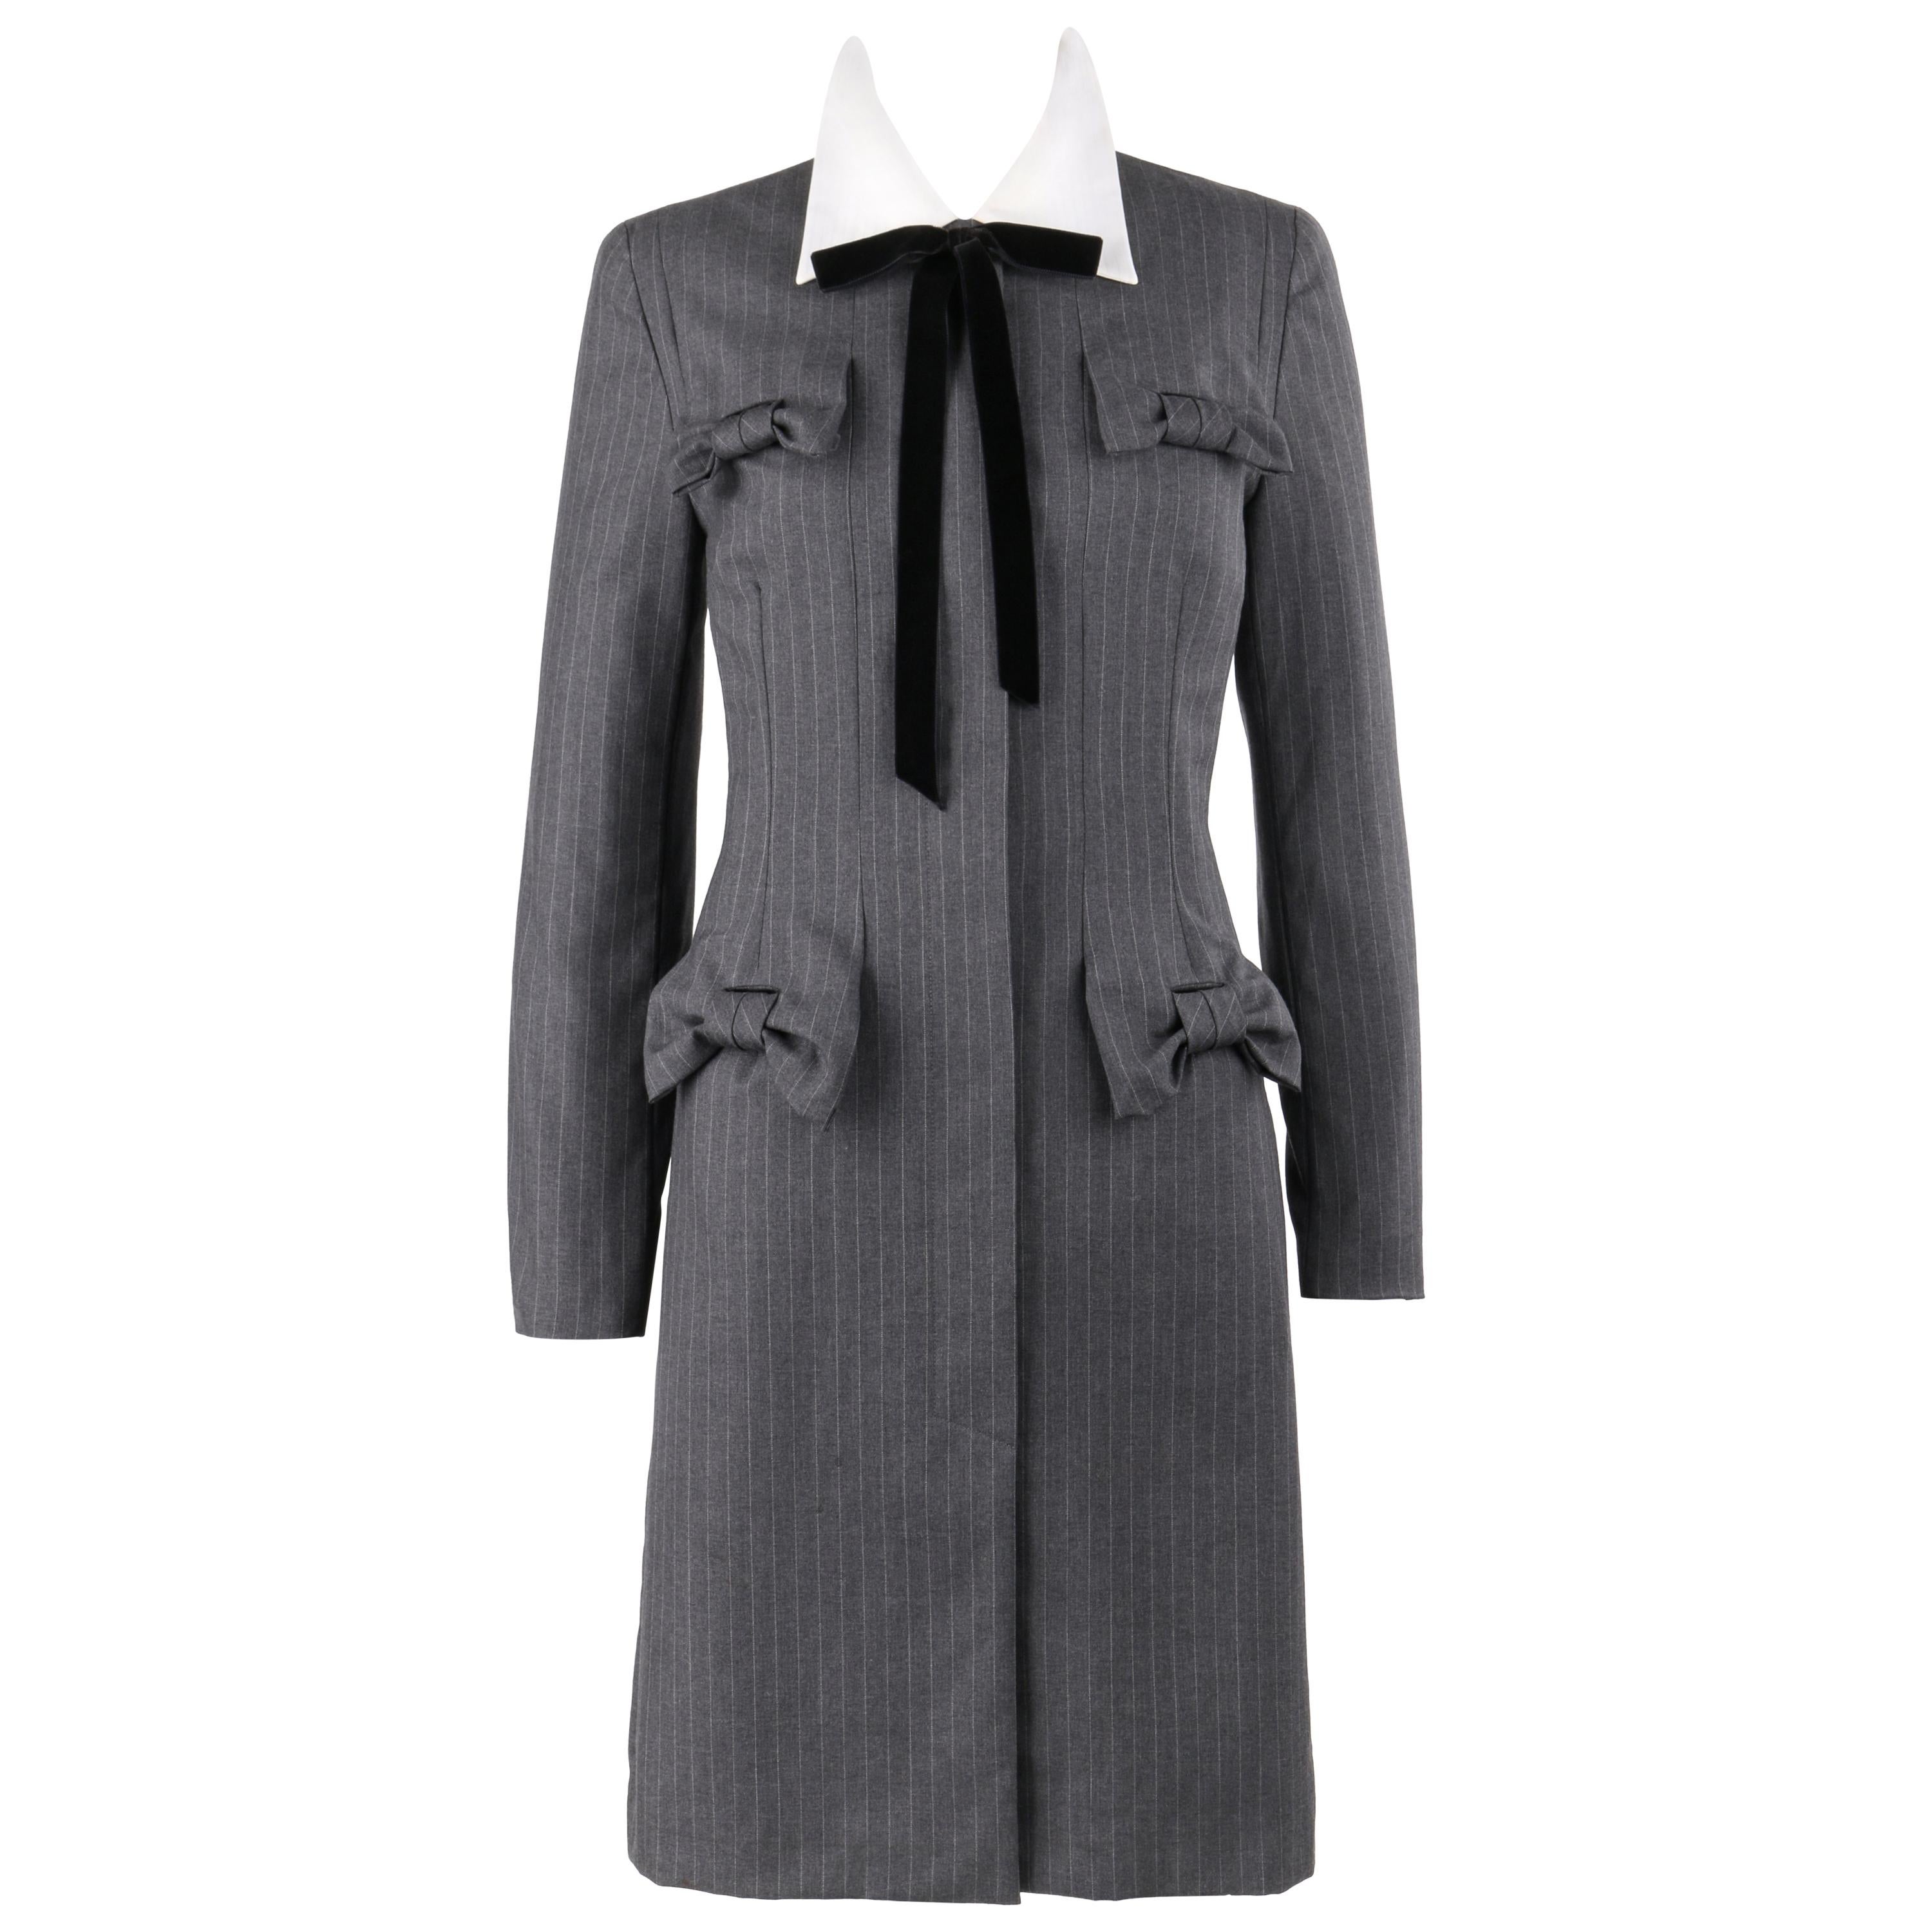 GIVENCHY Couture A/W 1996 JOHN GALLIANO Charcoal Gray Wool Bow Shirt ...